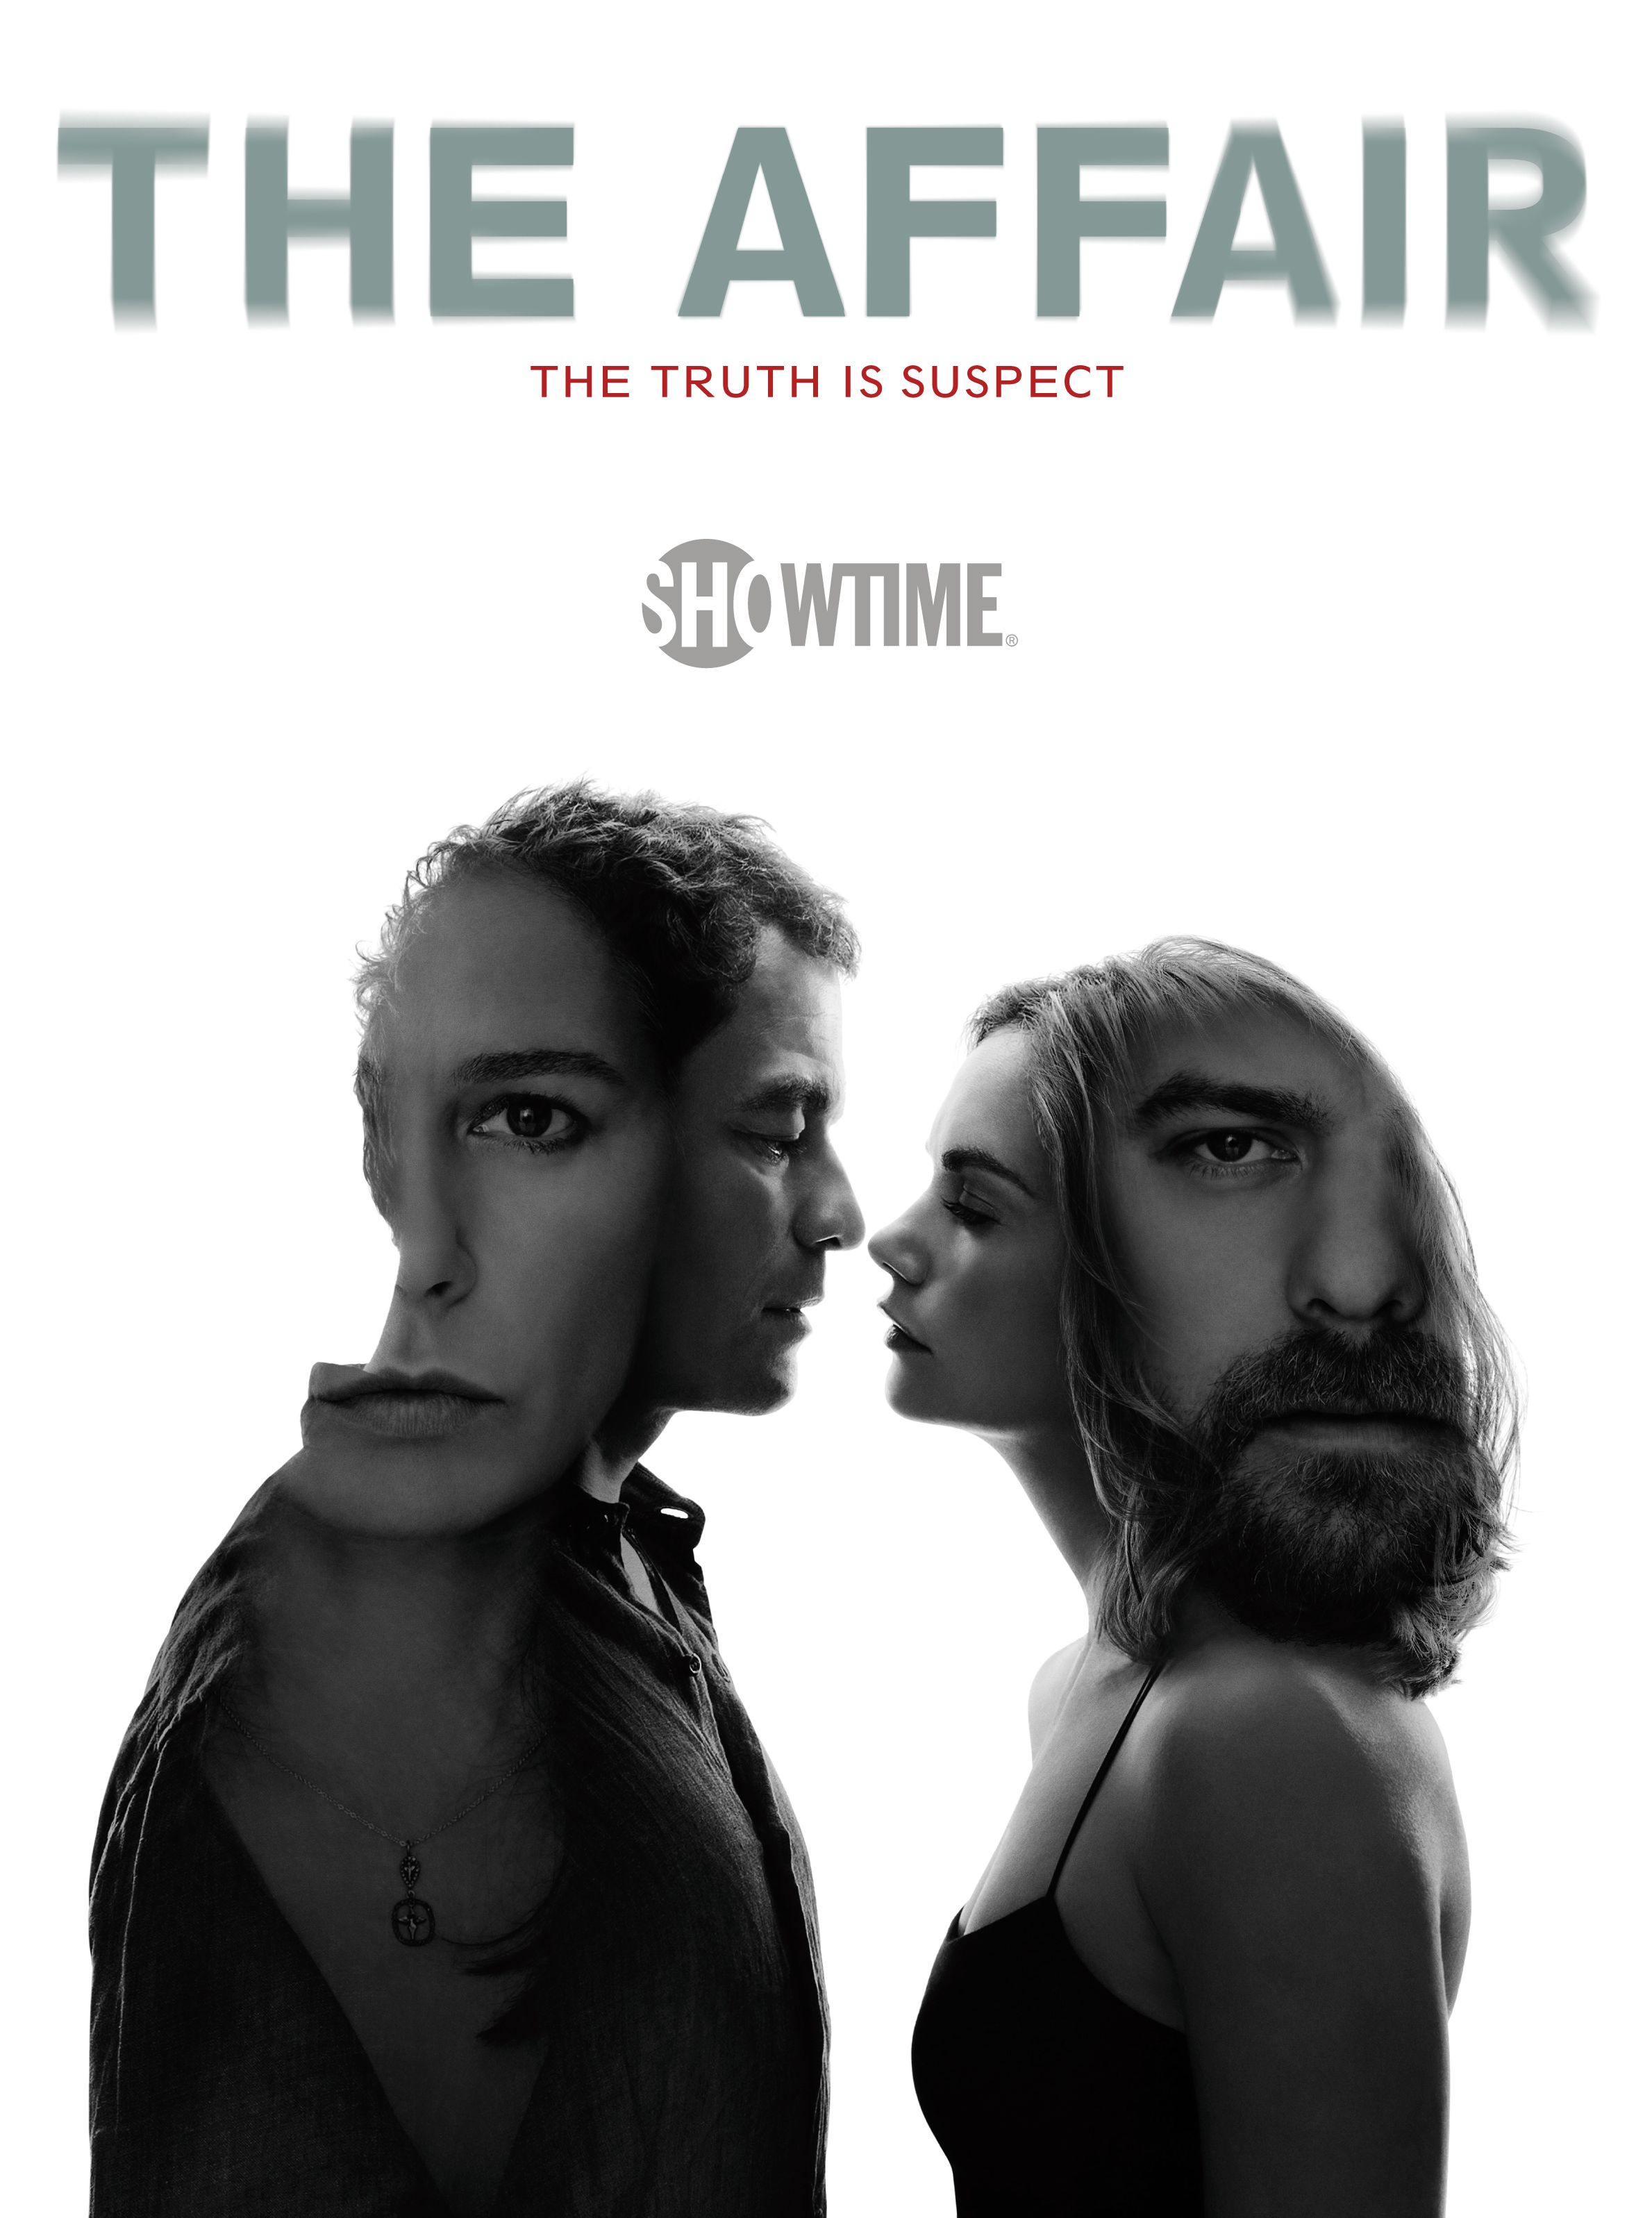 The Truth is Suspect - Cool new poster for The Affair Season